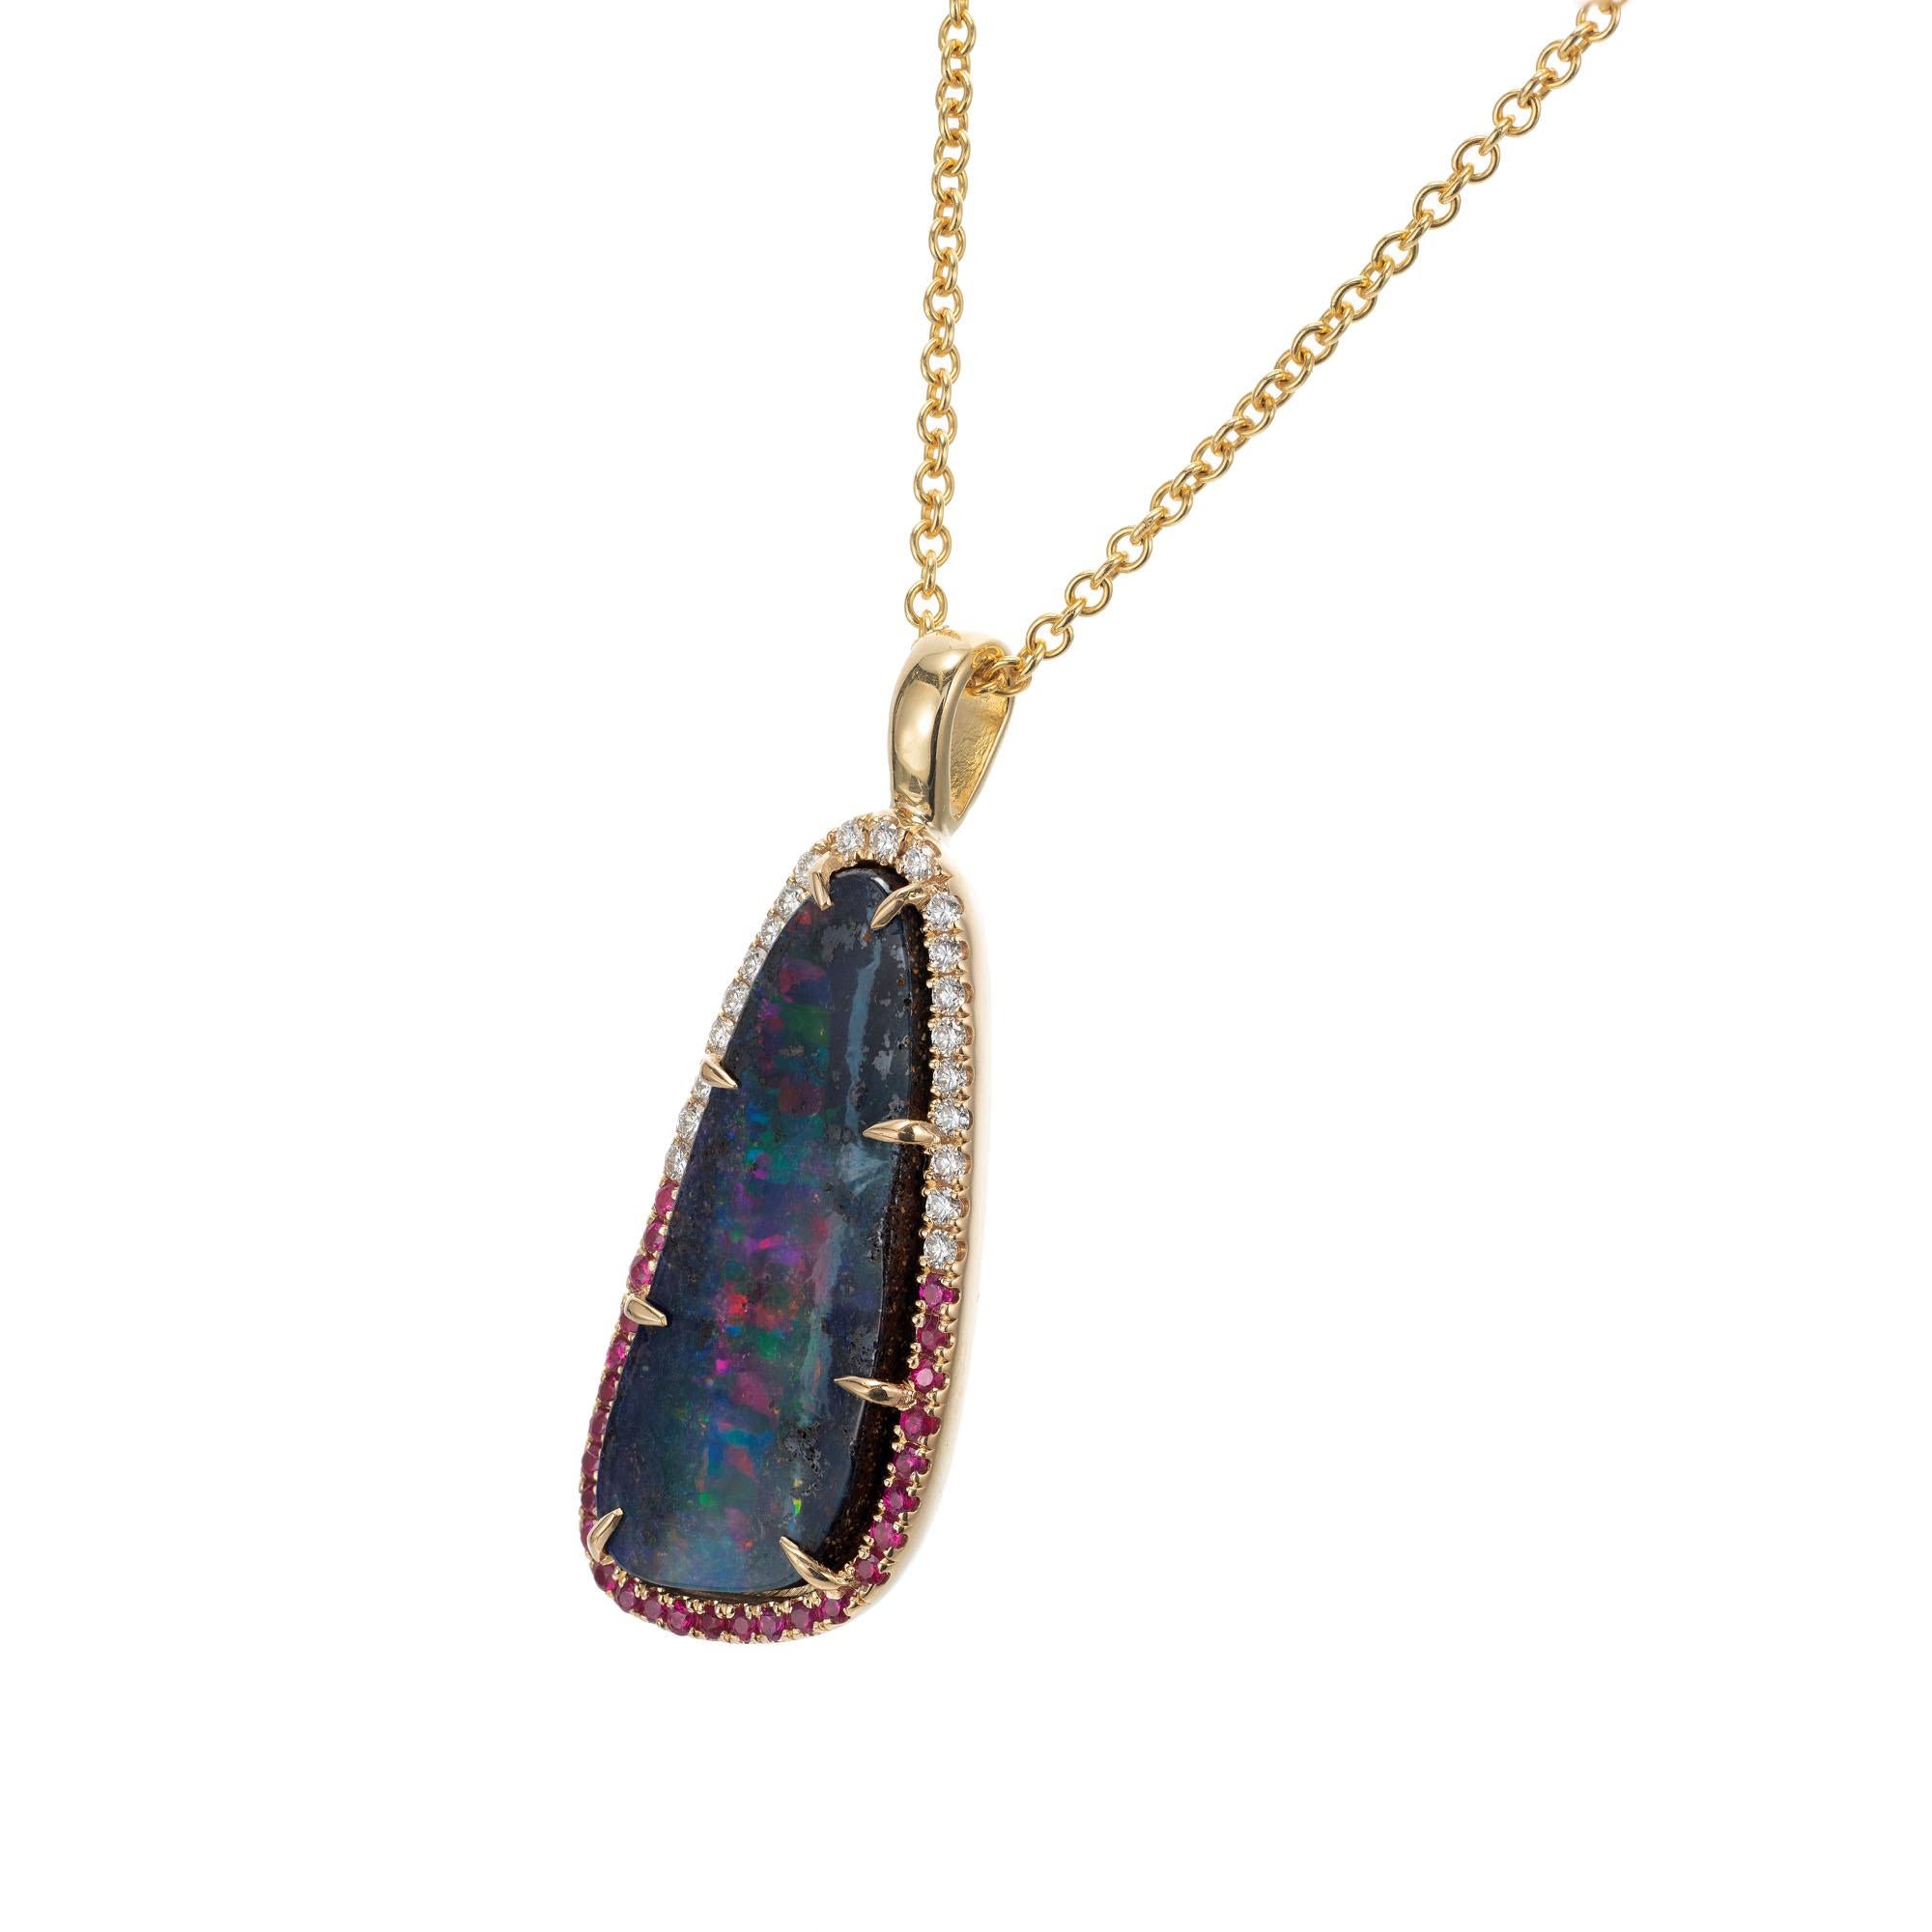 Natural Australian boulder opal necklace with a halo of rubies and diamonds. The opal has bluish black background with red, green and purple flash.  The pendant was designed in the Peter Suchy workshop

1 Australian boulder opal, approx. 8.16ct
27